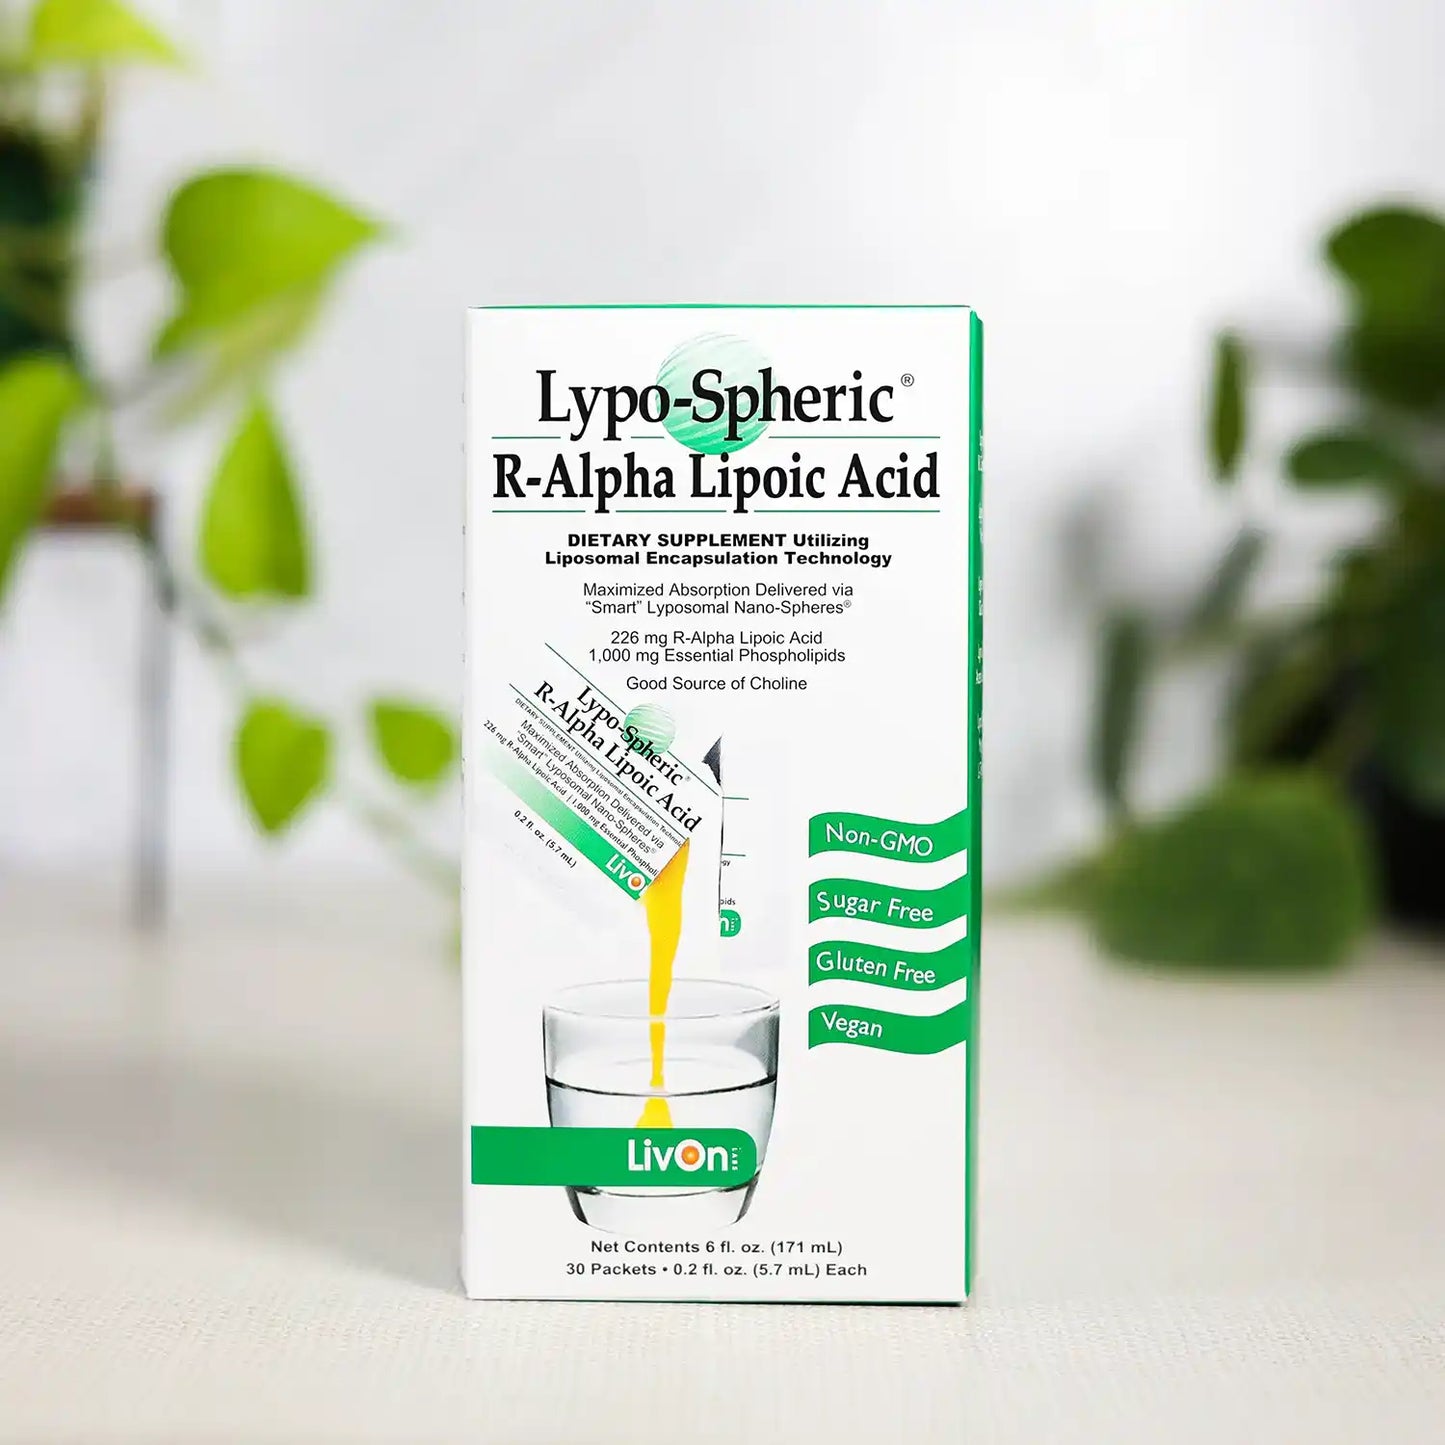 Lypo-Spheric R-Alpha Lipoic Acid carton with plants in background